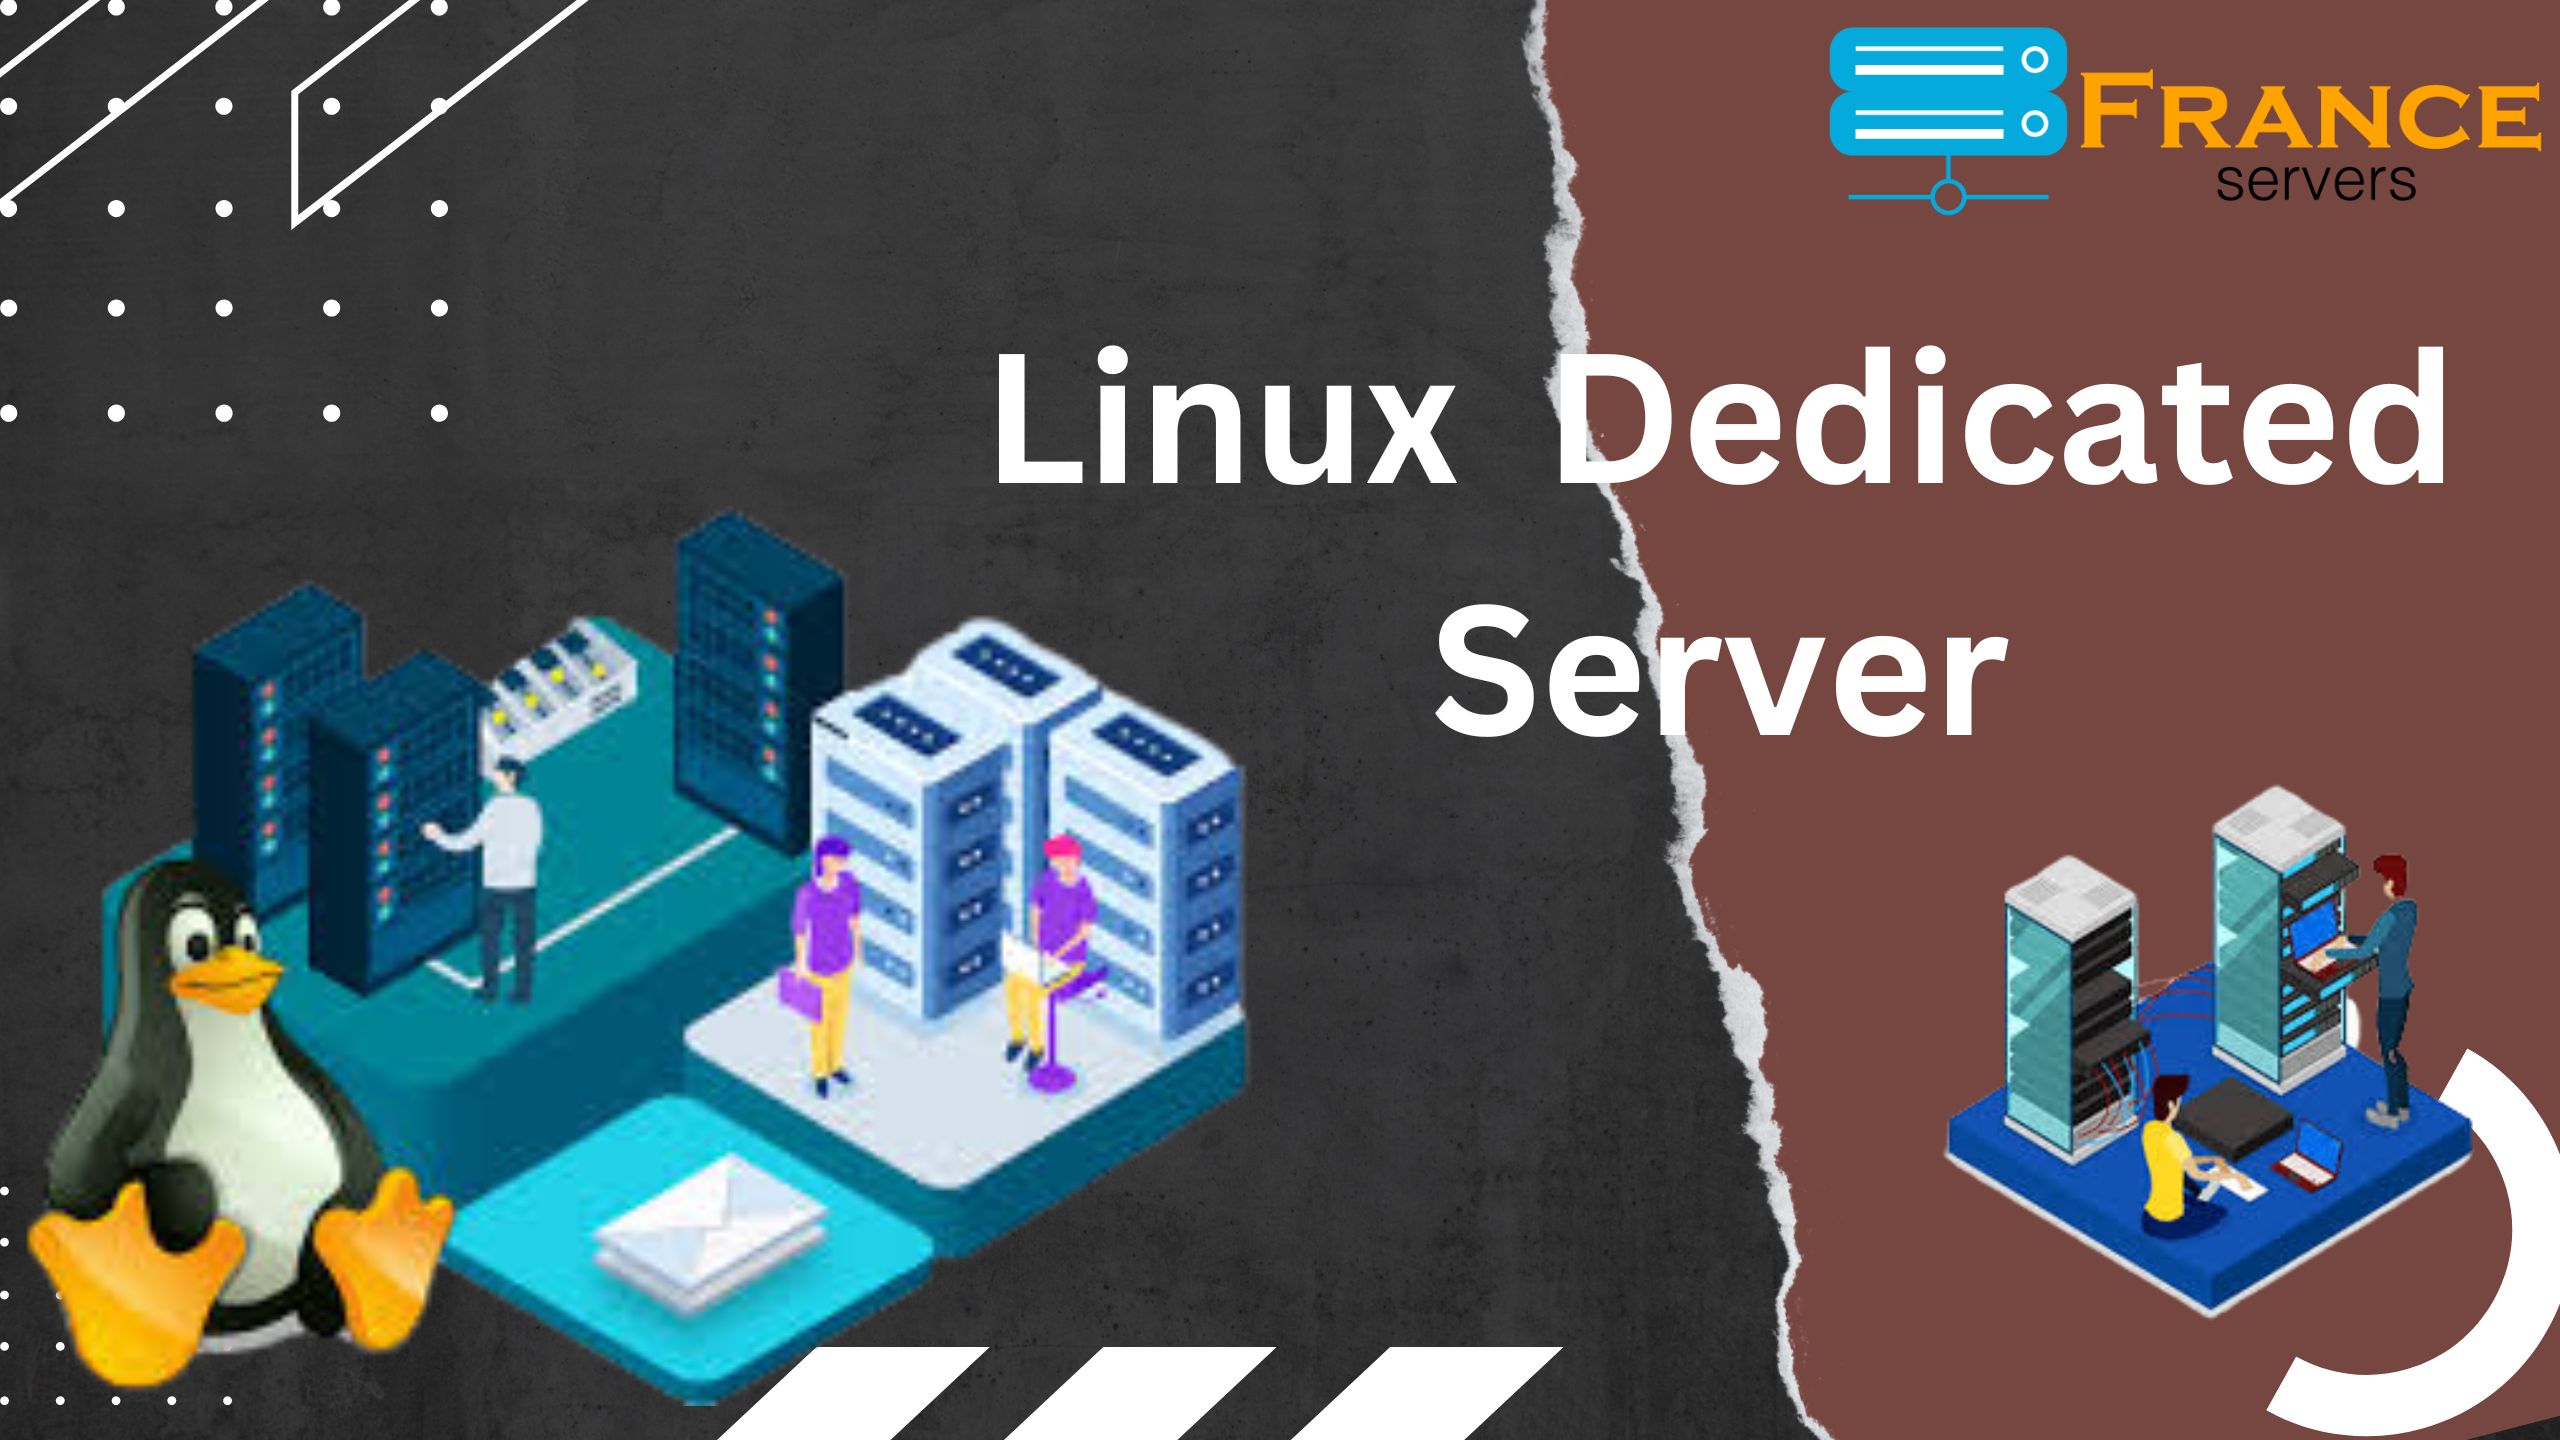 What Makes France Servers, Linux Dedicated Server Good Choice for Businesses? 